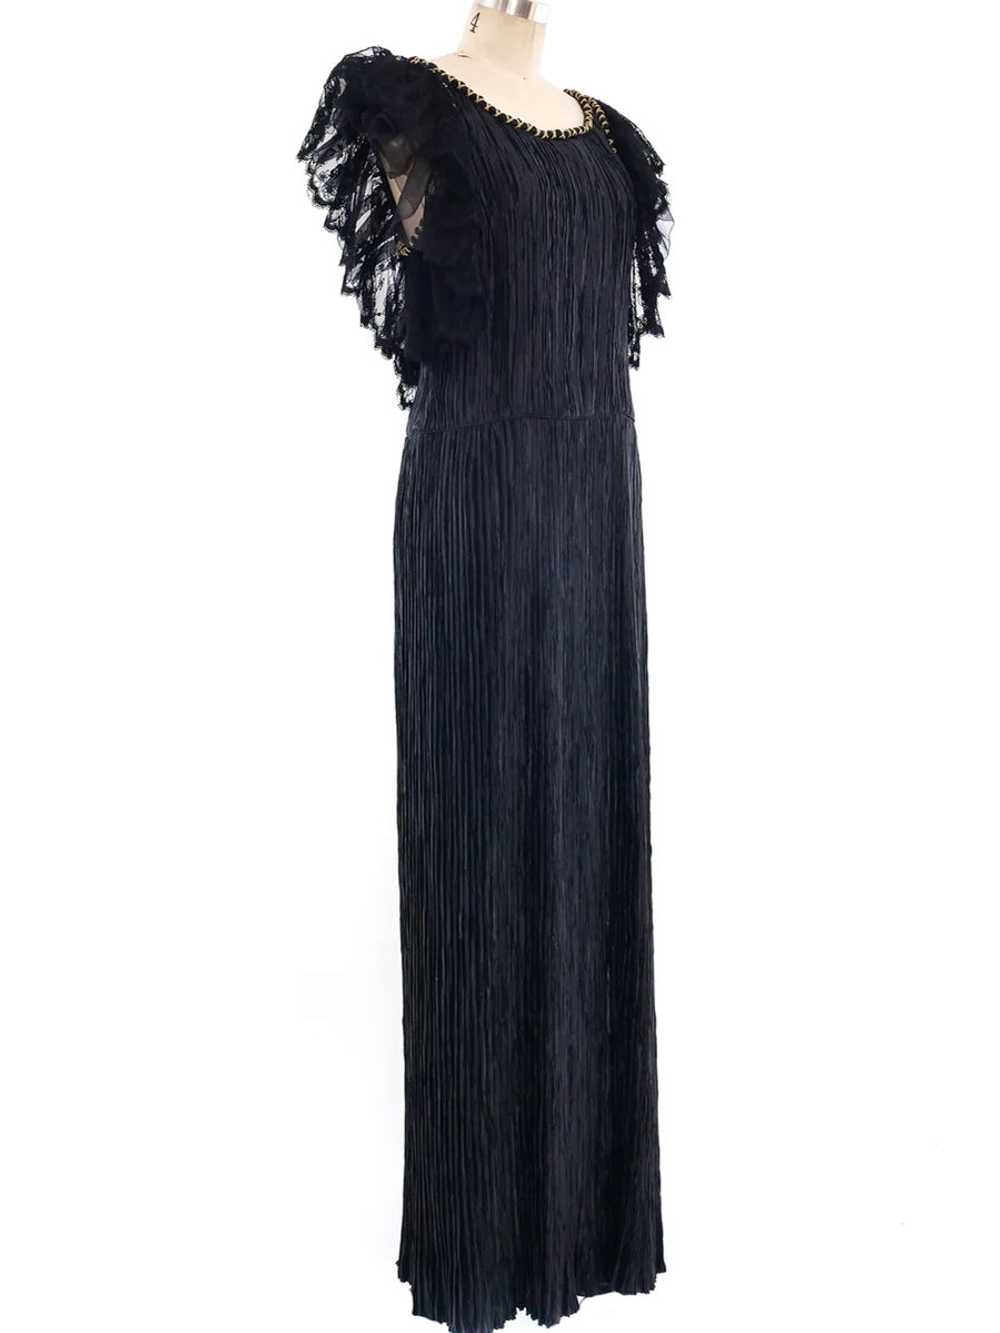 Mary McFadden Plisse Pleated Gown - image 2